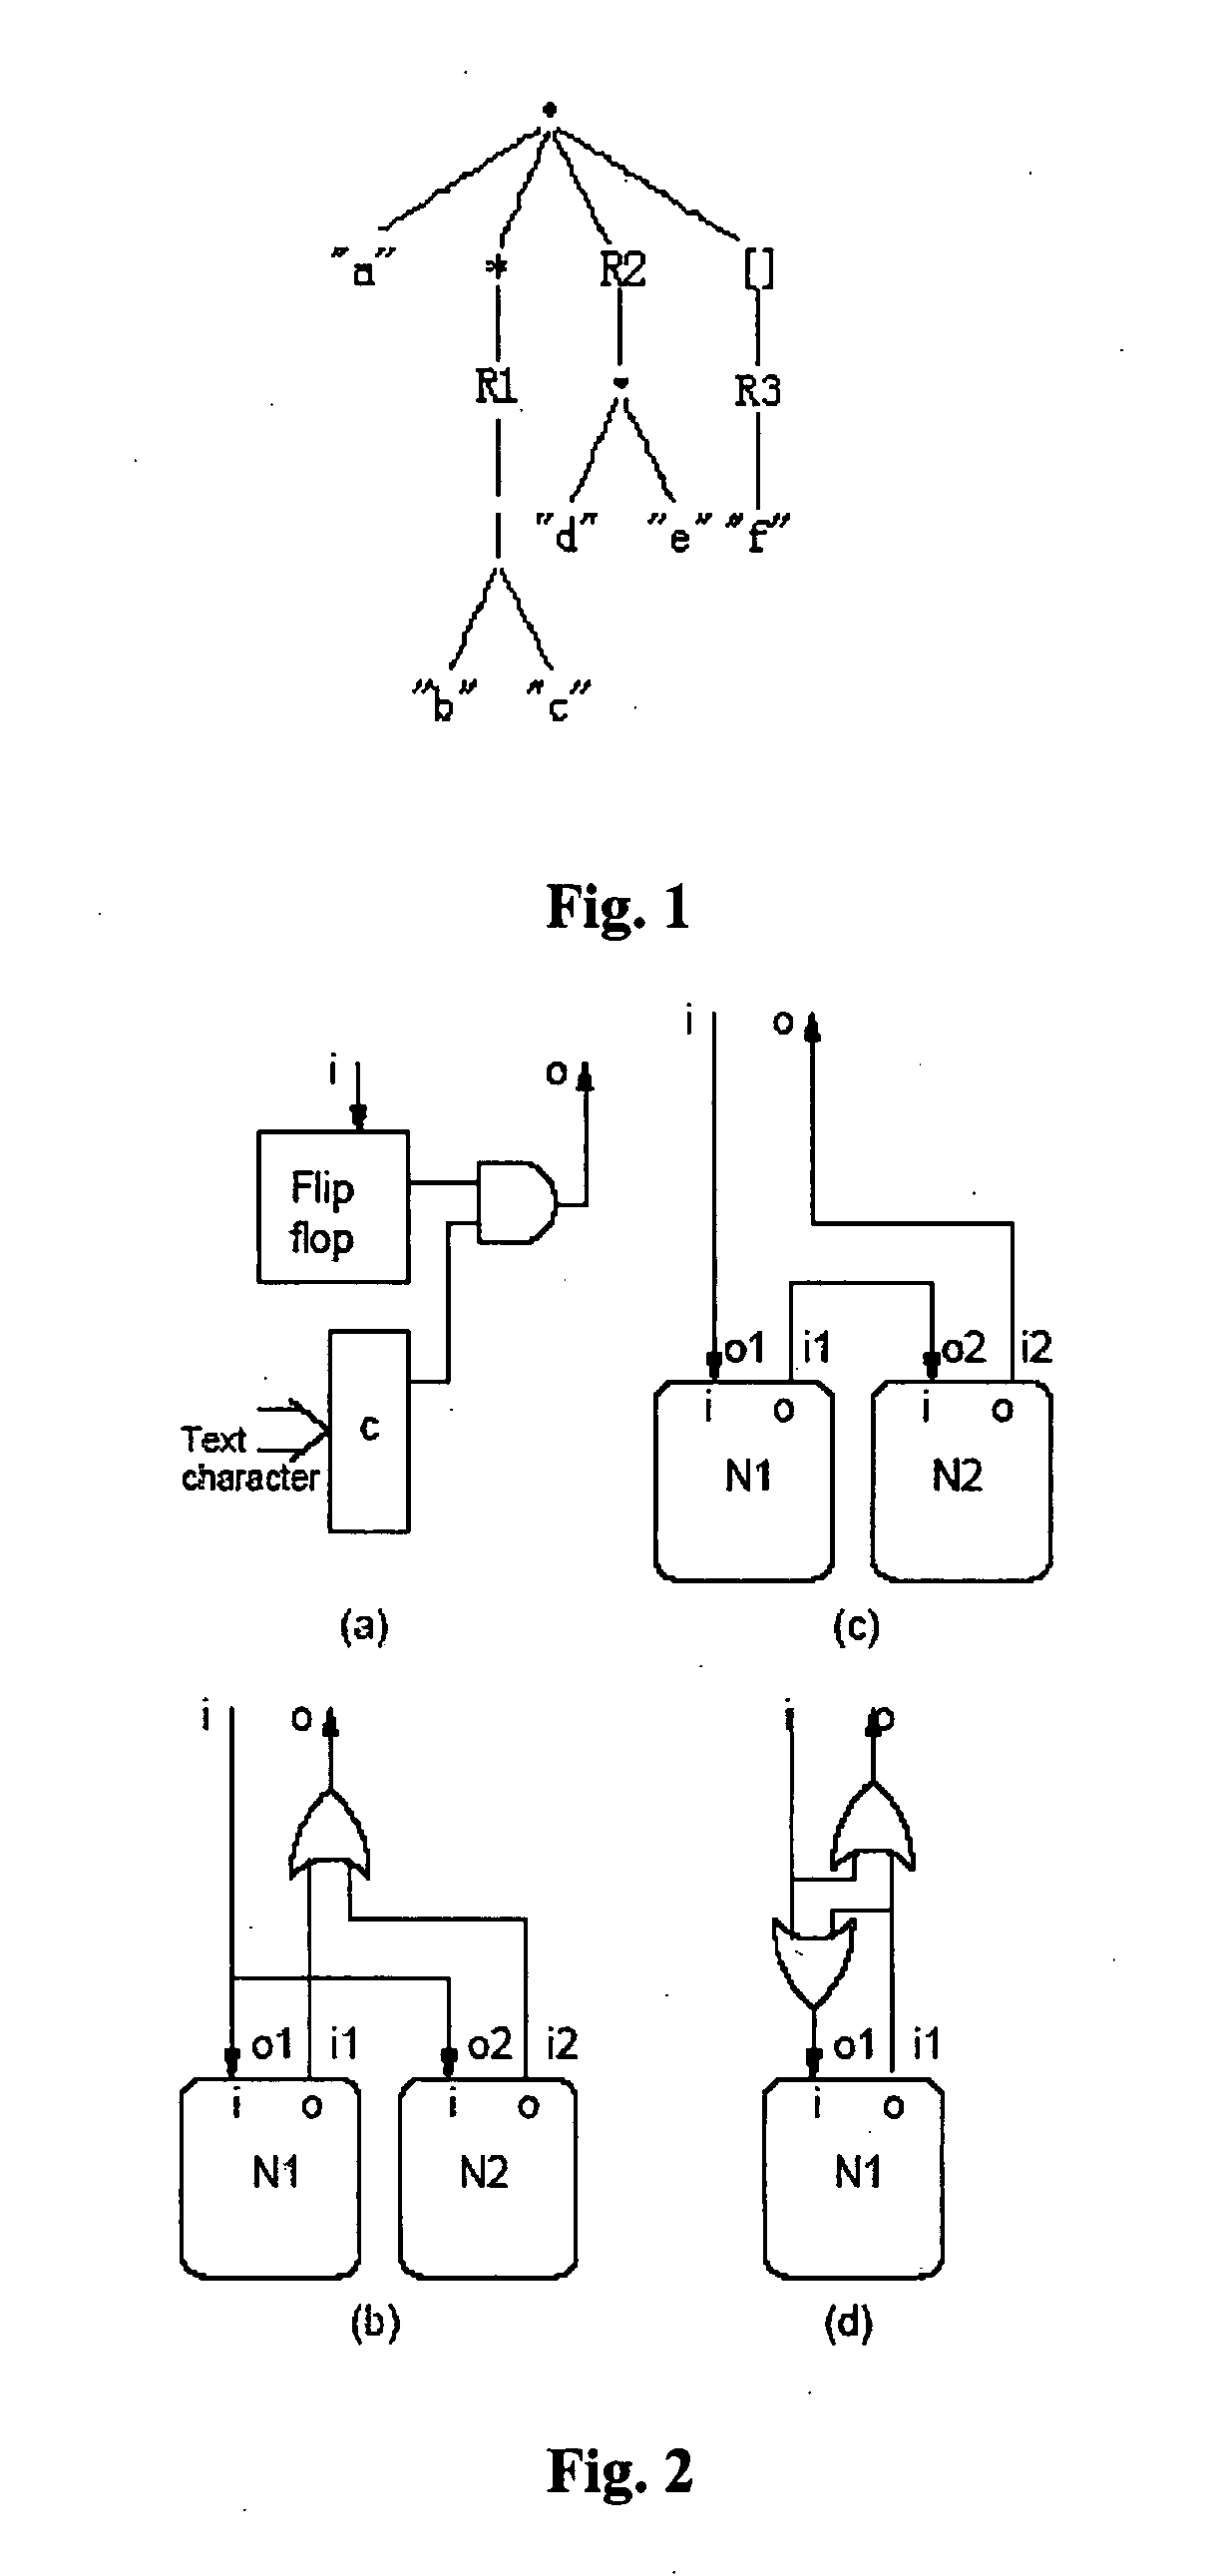 Method and device for ANBF string pattern matching and parsing